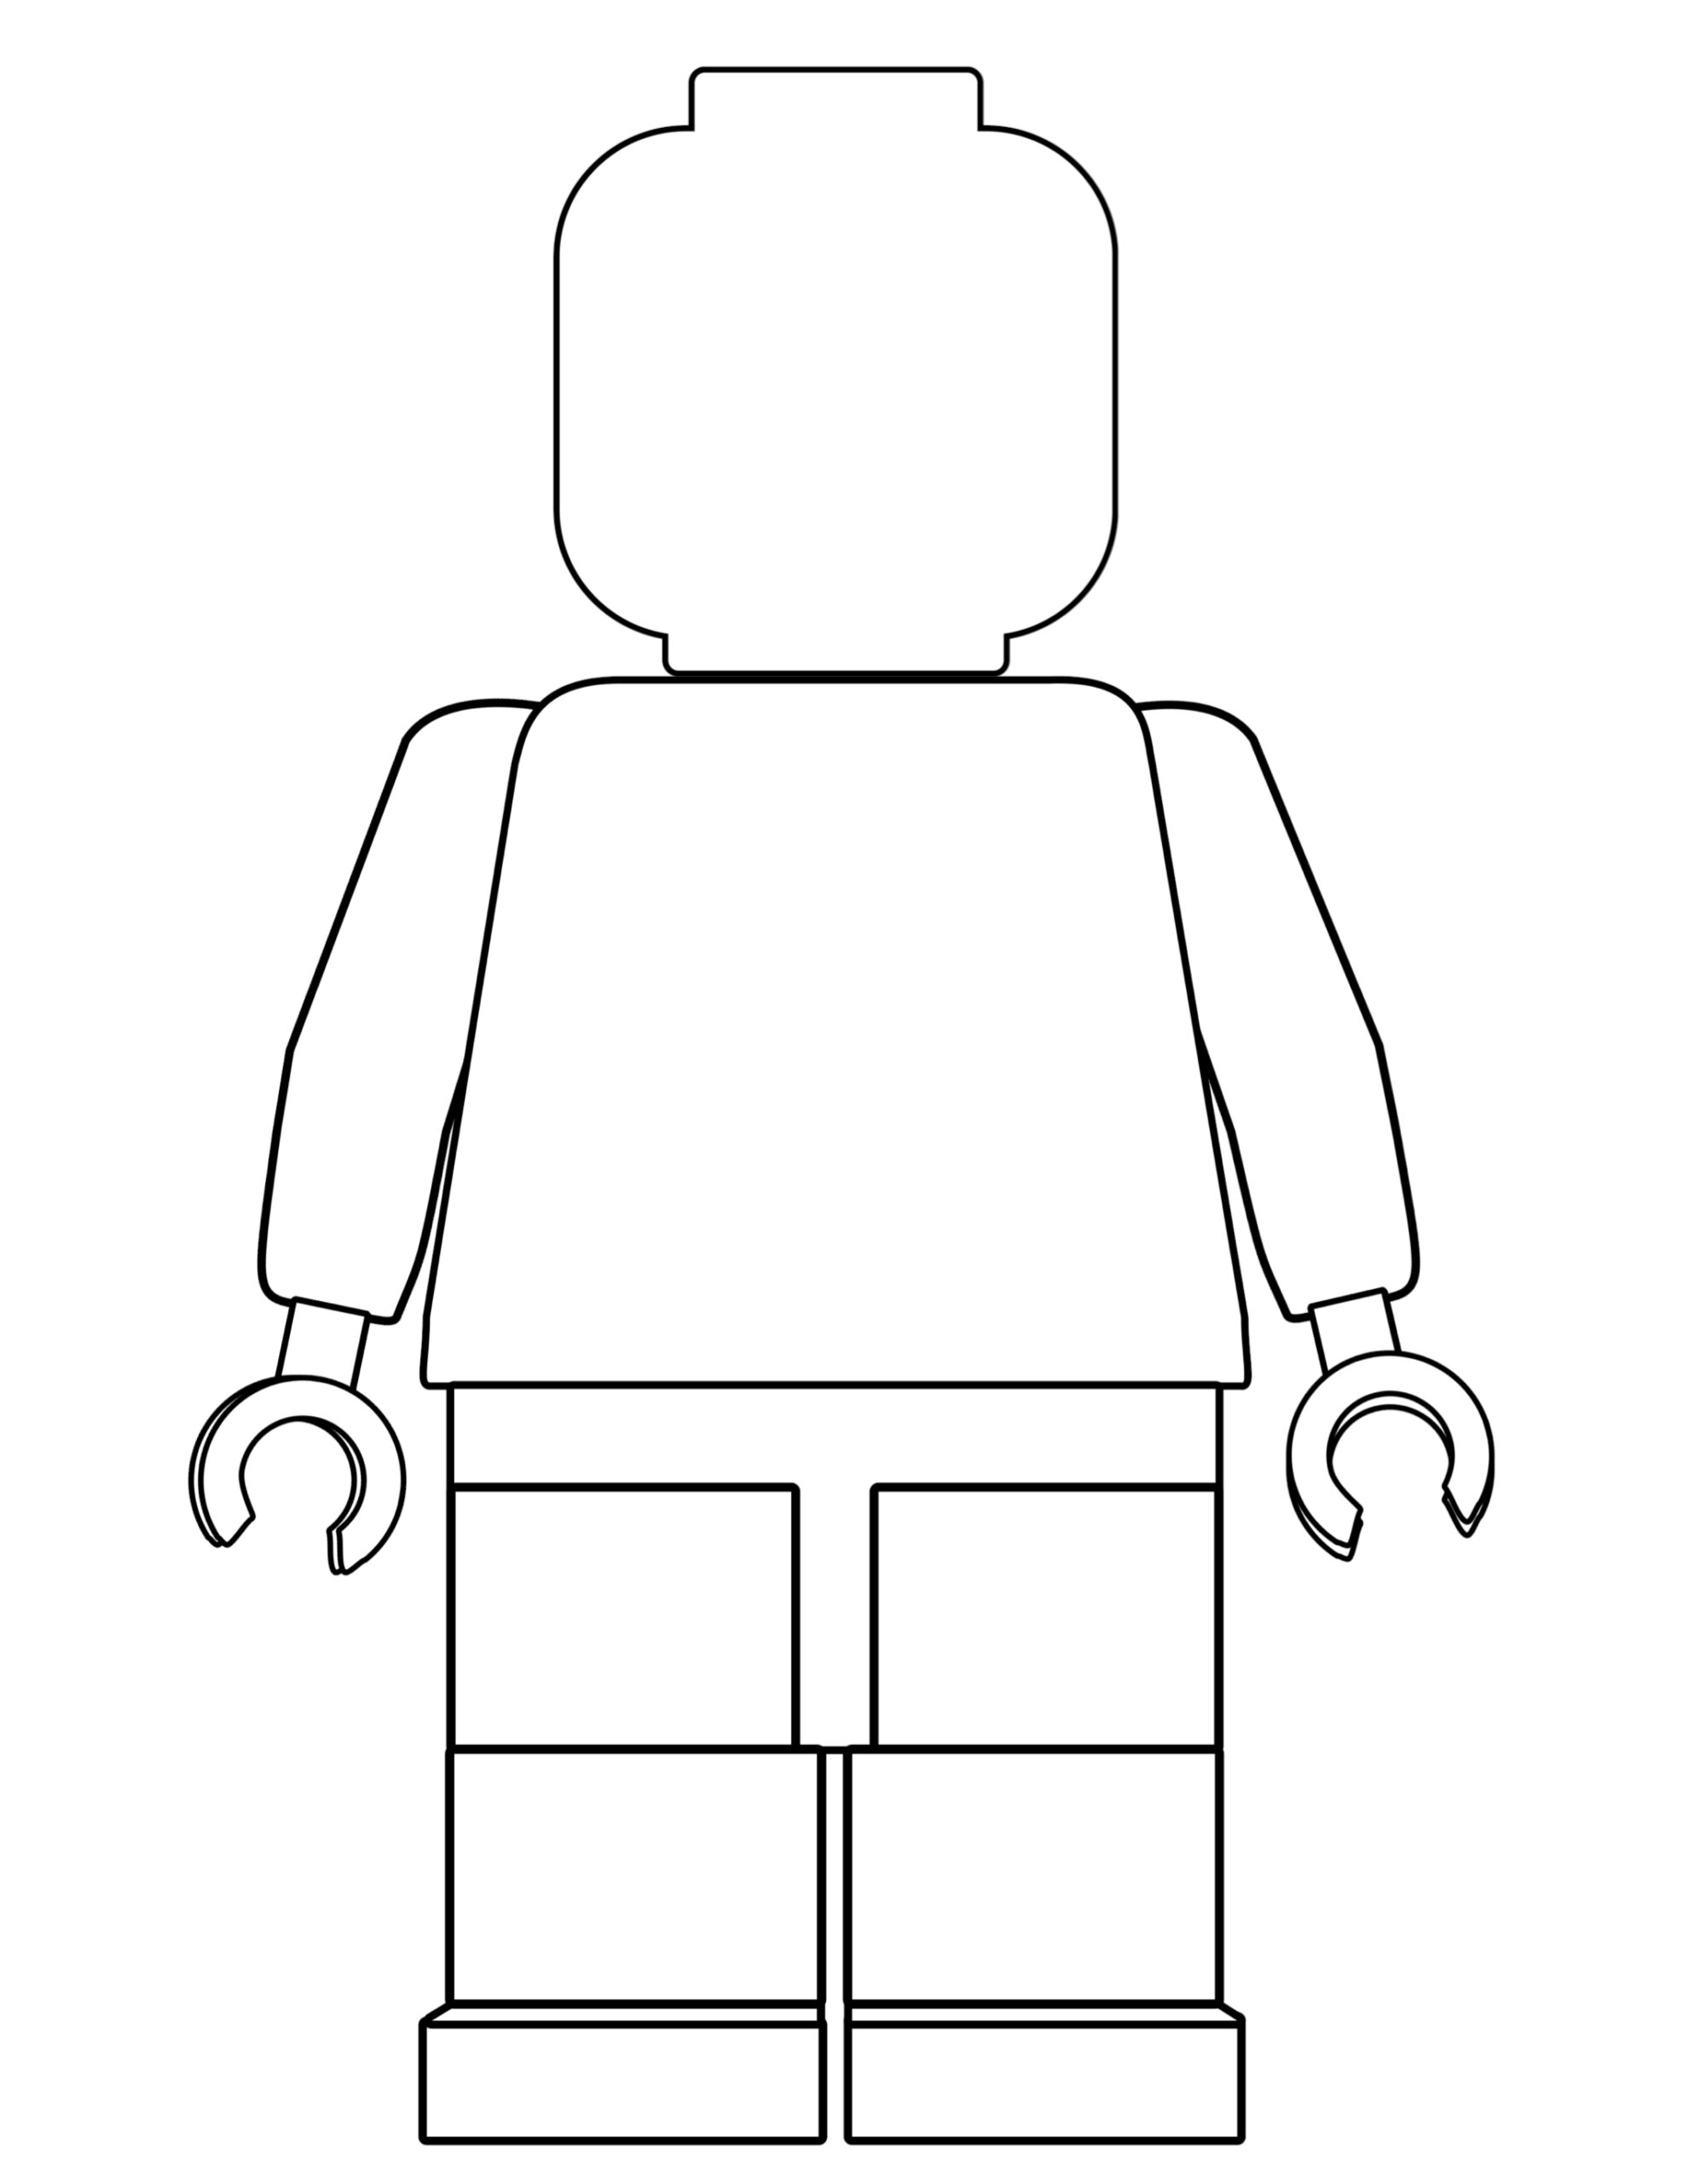 lego man face template black and white